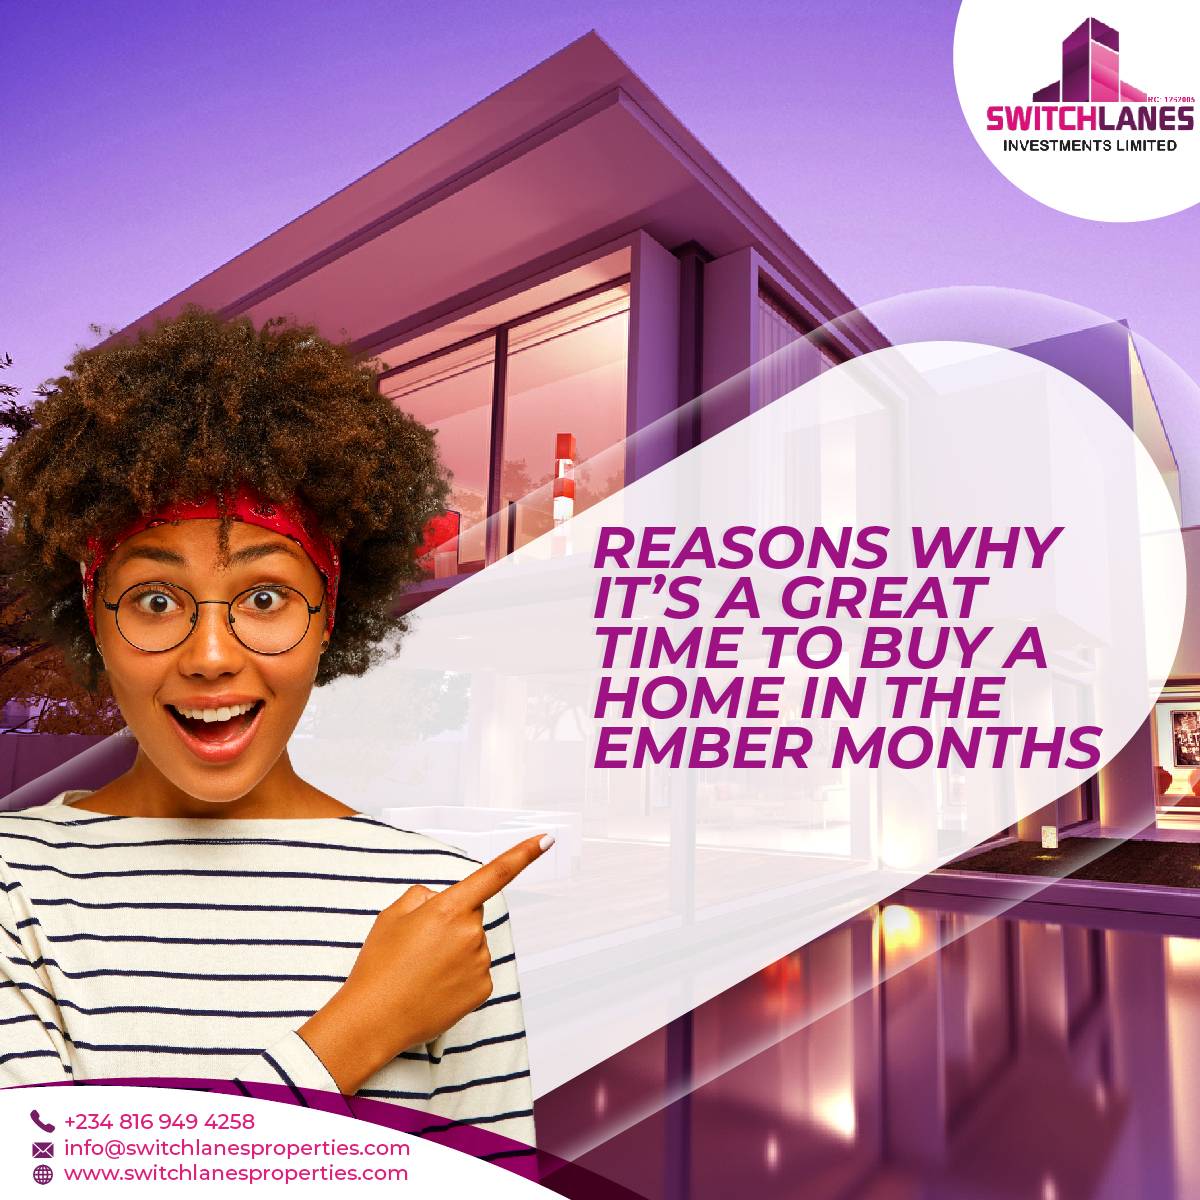 You are currently viewing Reasons why it’s a great time to buy a home in the ember months.